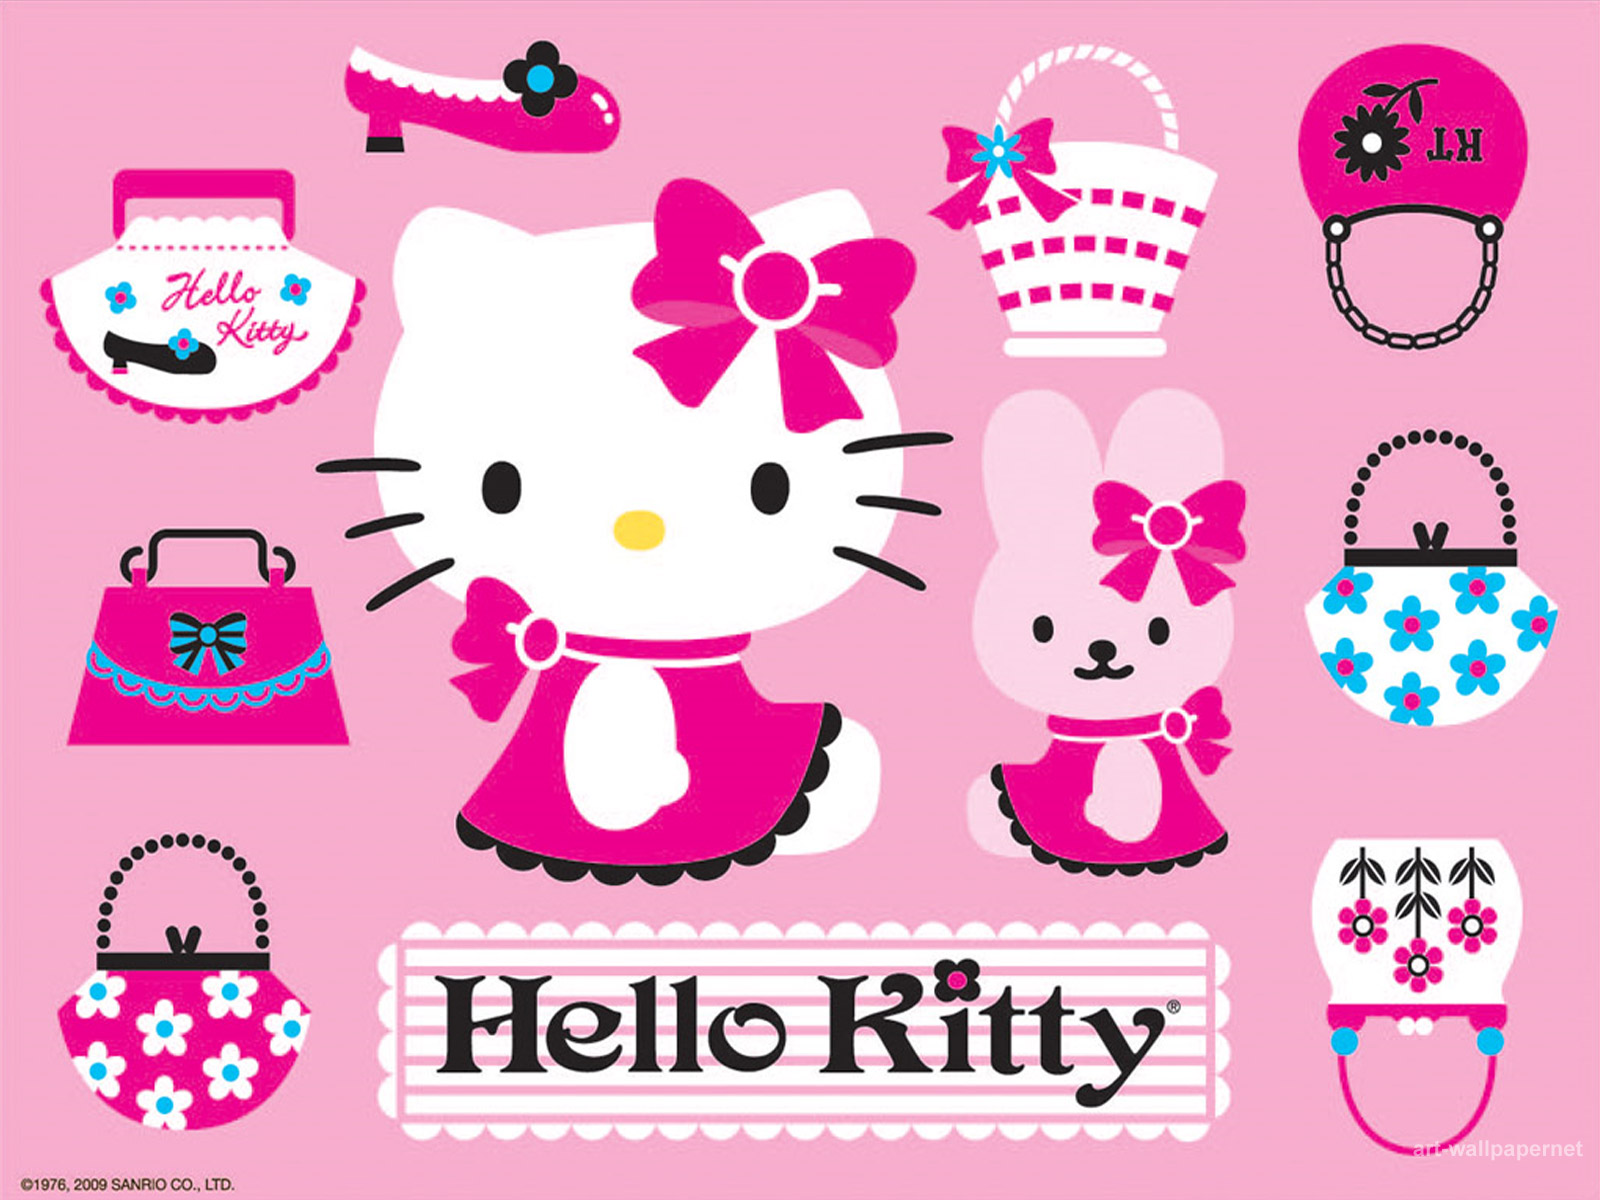 Hello Kitty Wallpaper HD Android Best Funny Image